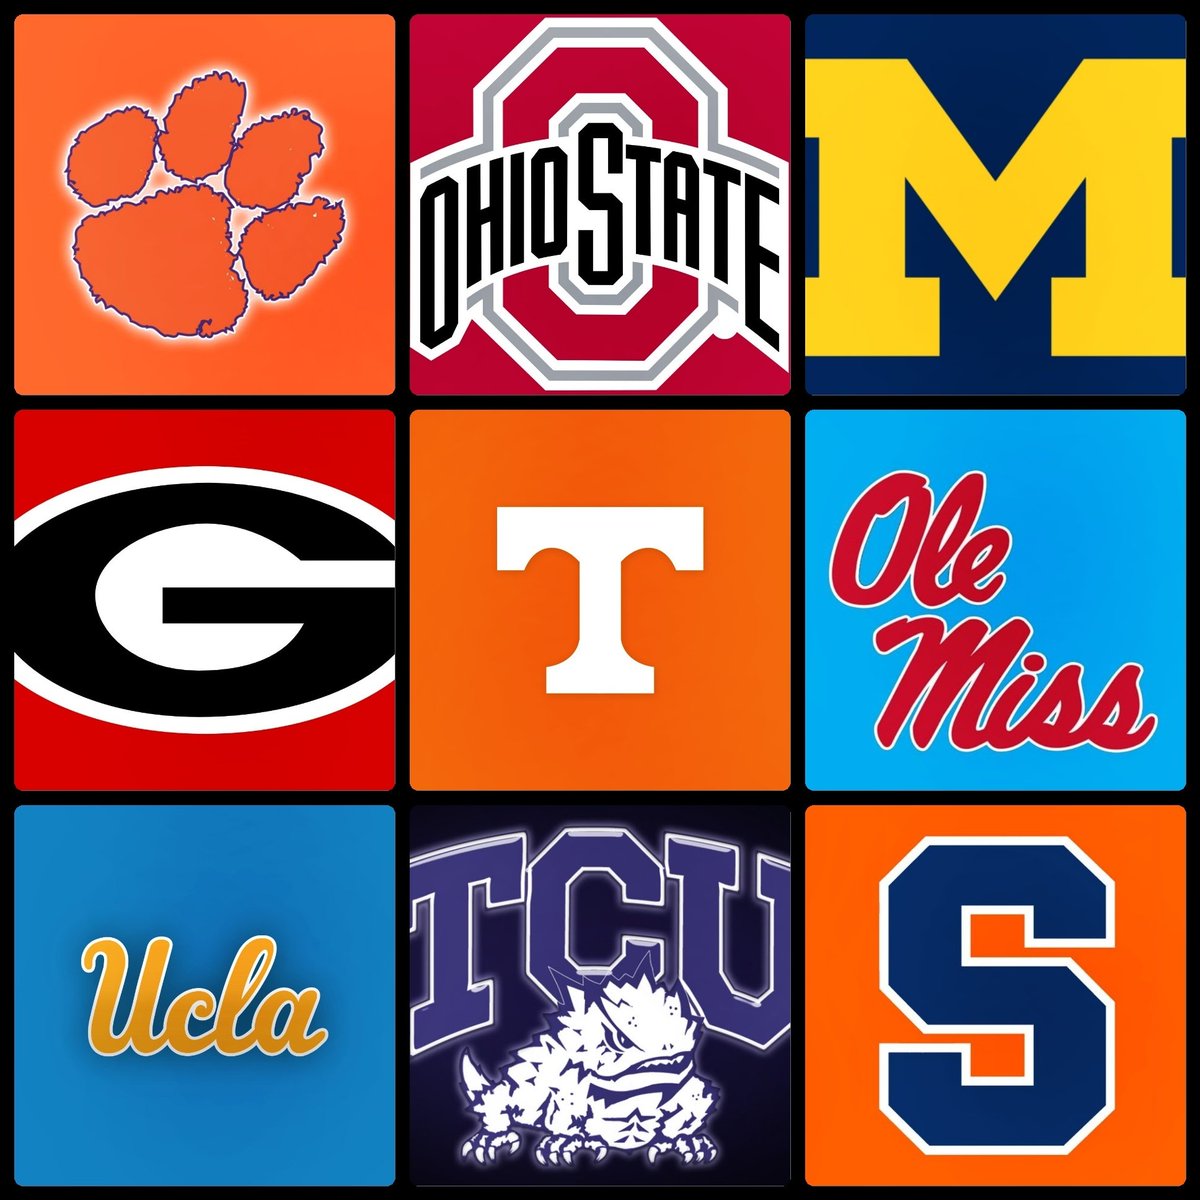 RETWEET if your #CFB team is still UNDEFEATED after Week 7 #FBS